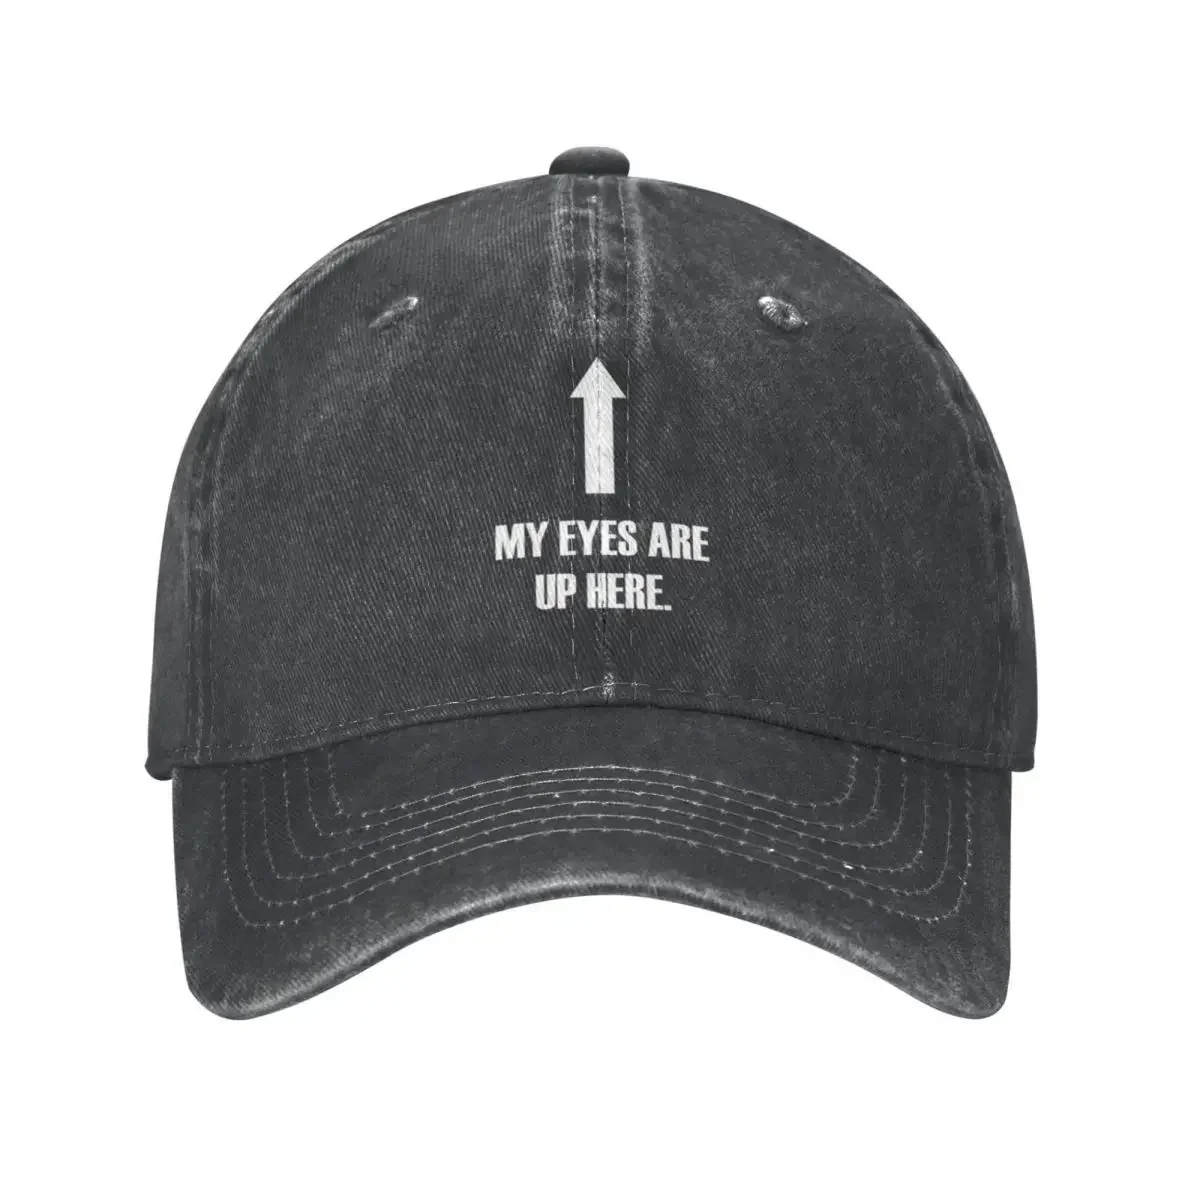 

My eyes are up here! Essential Baseball Cap Trucker Hat Dropshipping New In Hat Hat Women Men'S